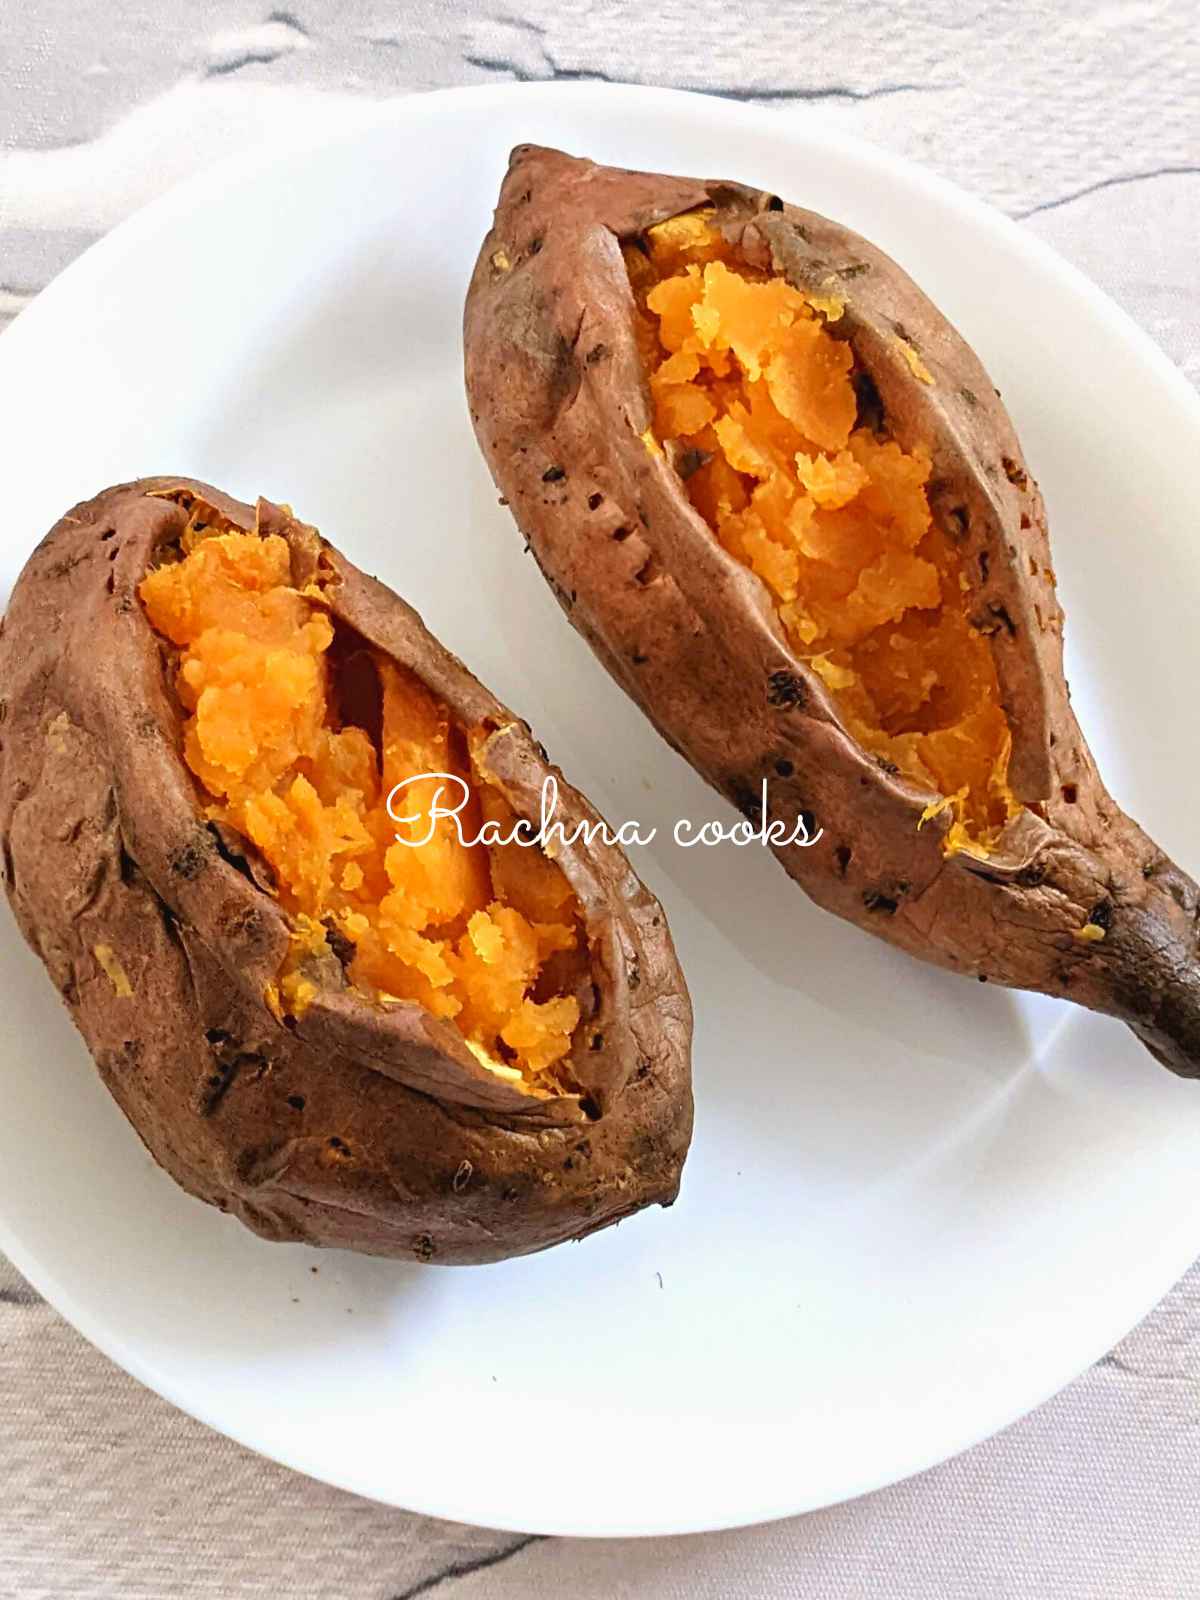 Two large air fried baked sweet potato with wrinkly skin and fluffy flesh on a white plate.